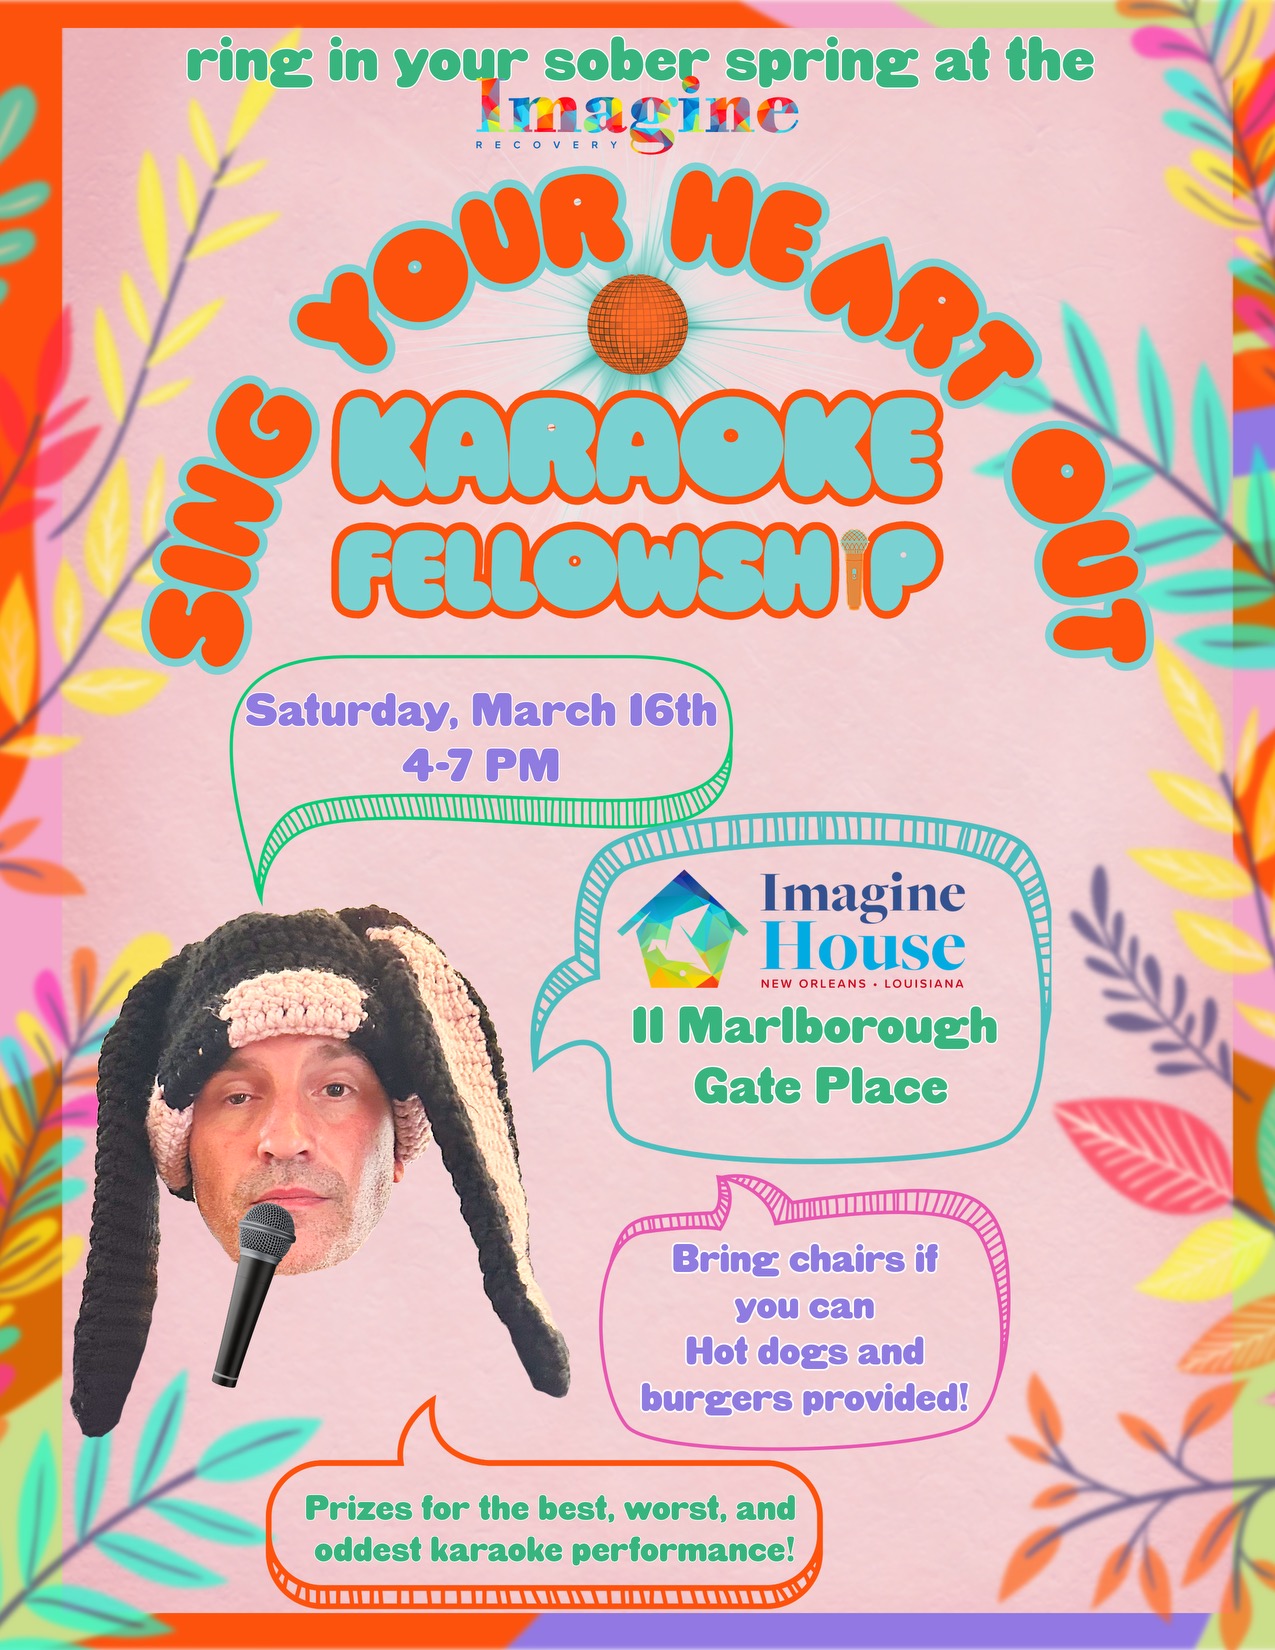 ring in your sober spring at the RECOVERY gine OUR HEAD, &no Saturday, March 16th 4•7 PM Imagine House NEW ORLEANS • LOUISIANA 1l Marlborough Gate Place Prizes for the best, worst, and oddest karaoke performance!